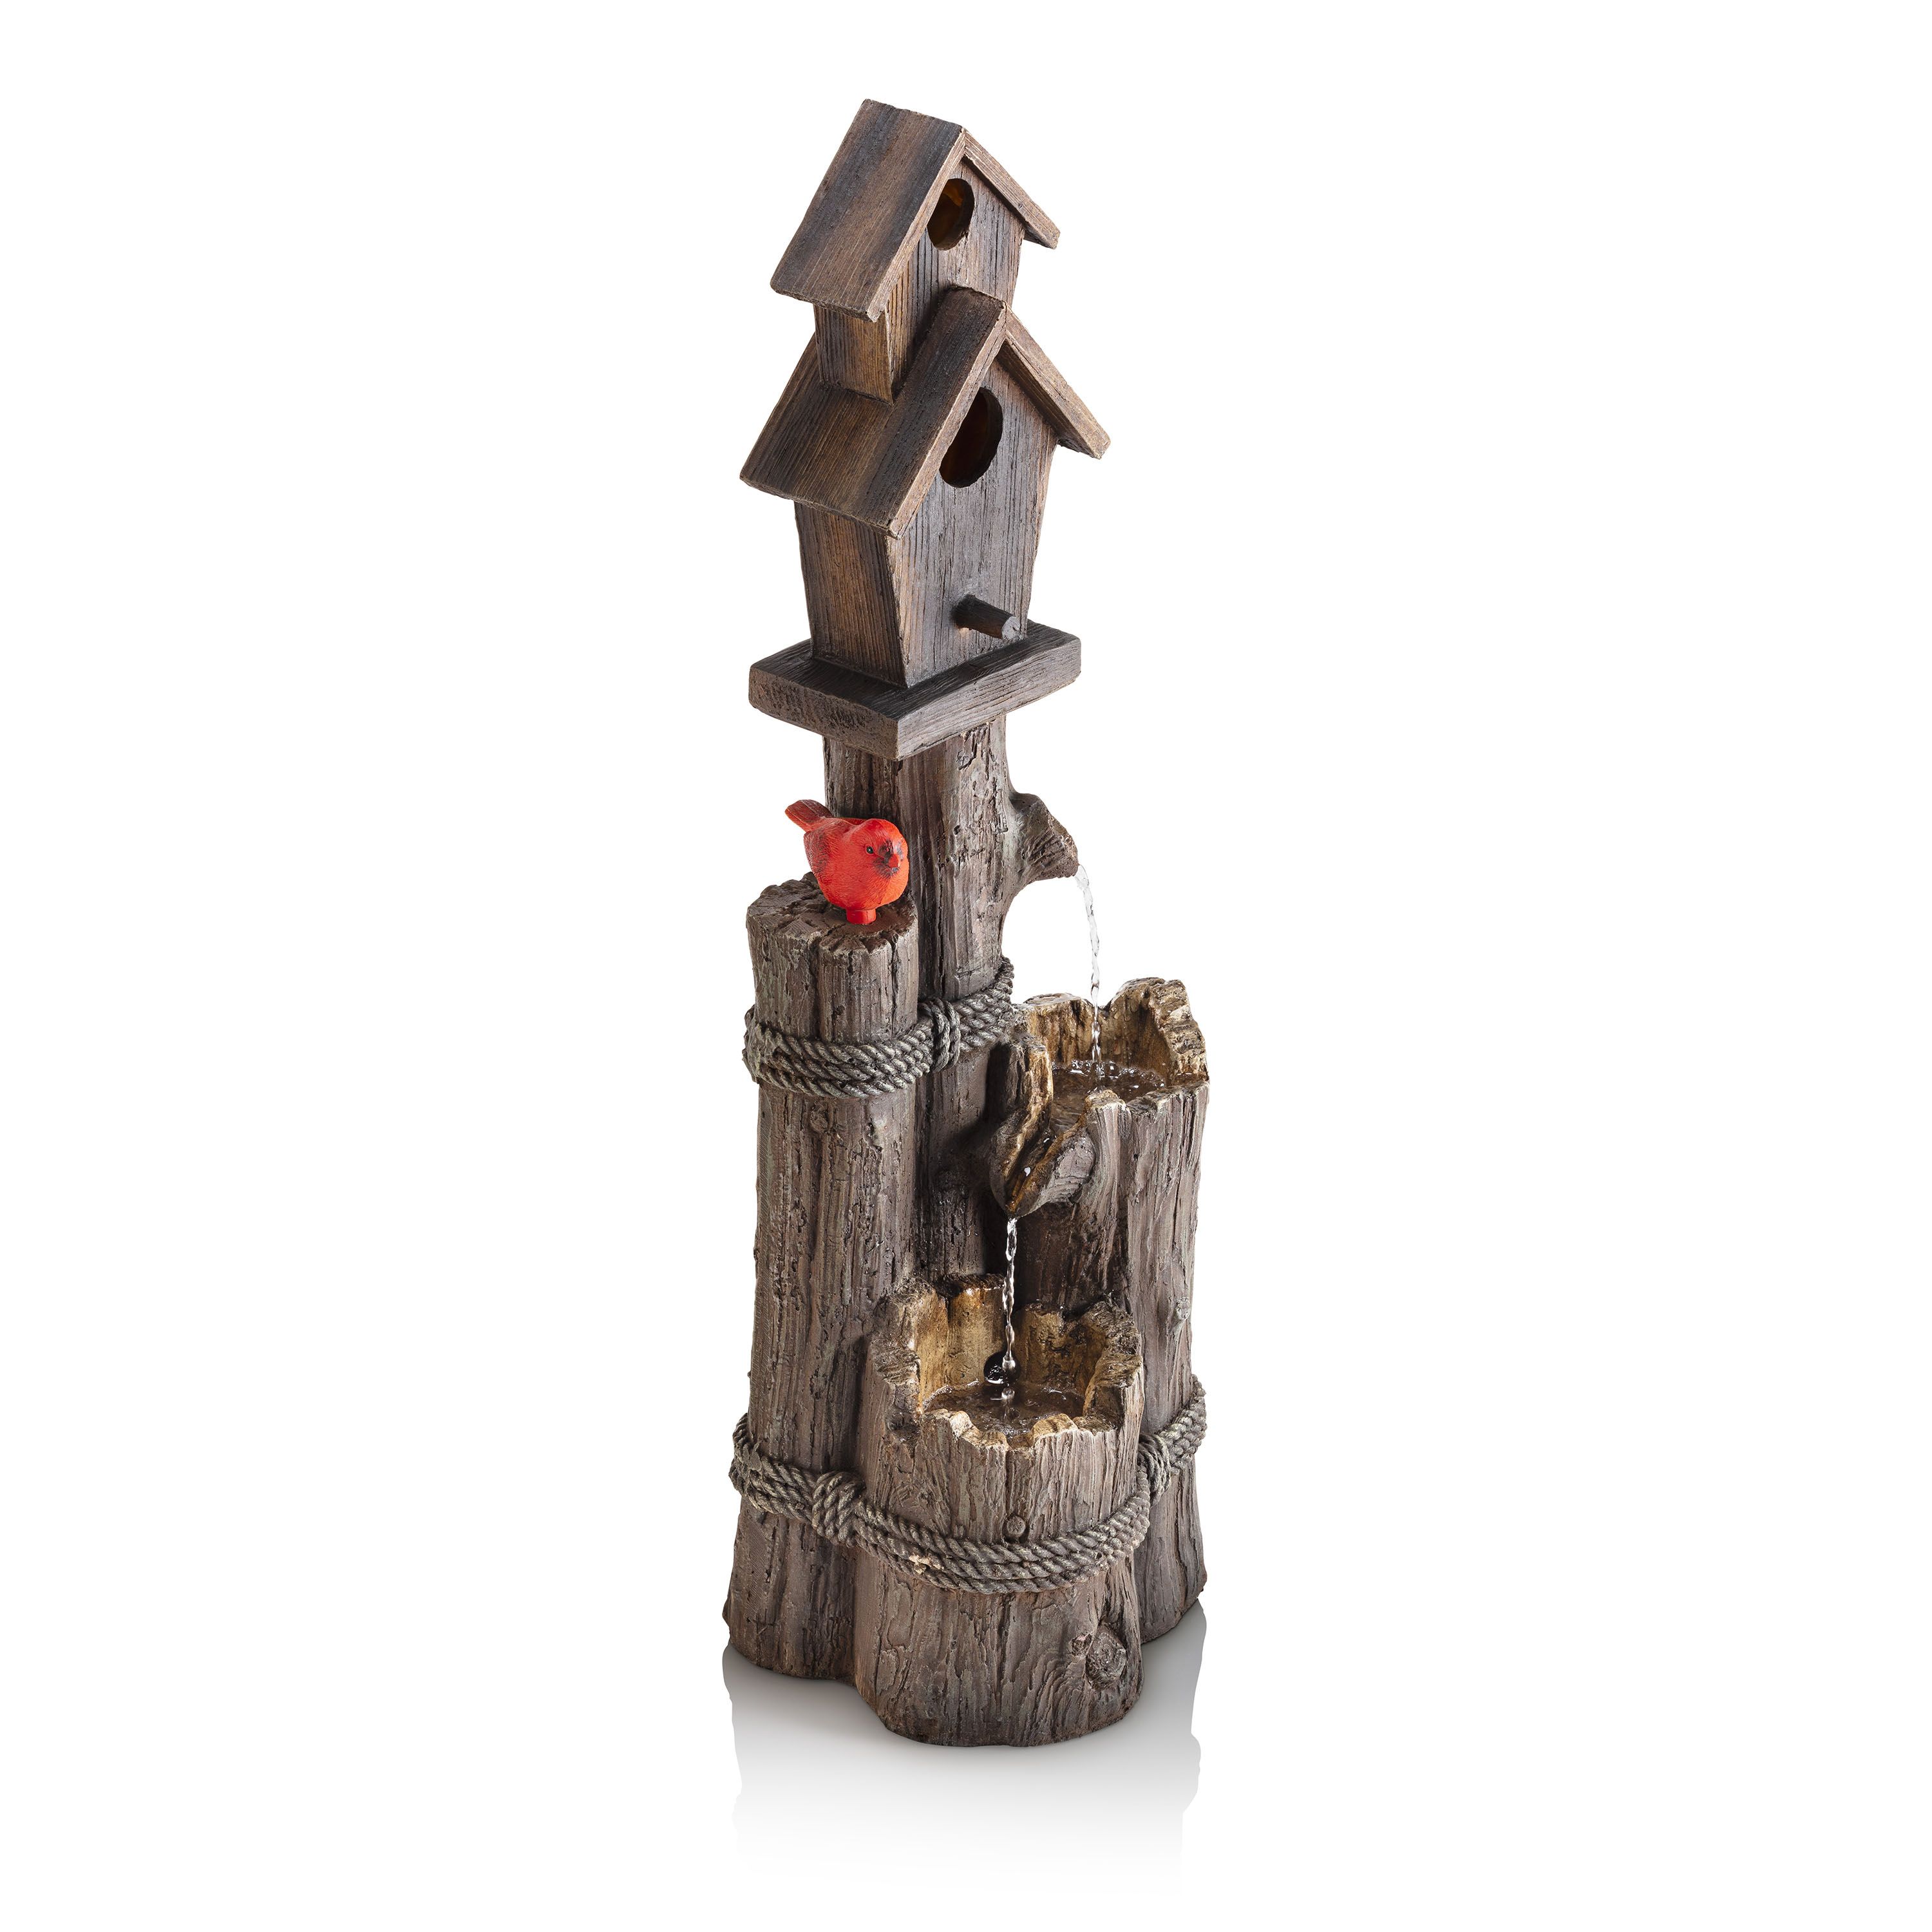 Alpine Corporation 35-Inch Fountain and Birdhouse with Cardinal Figurine - image 3 of 12